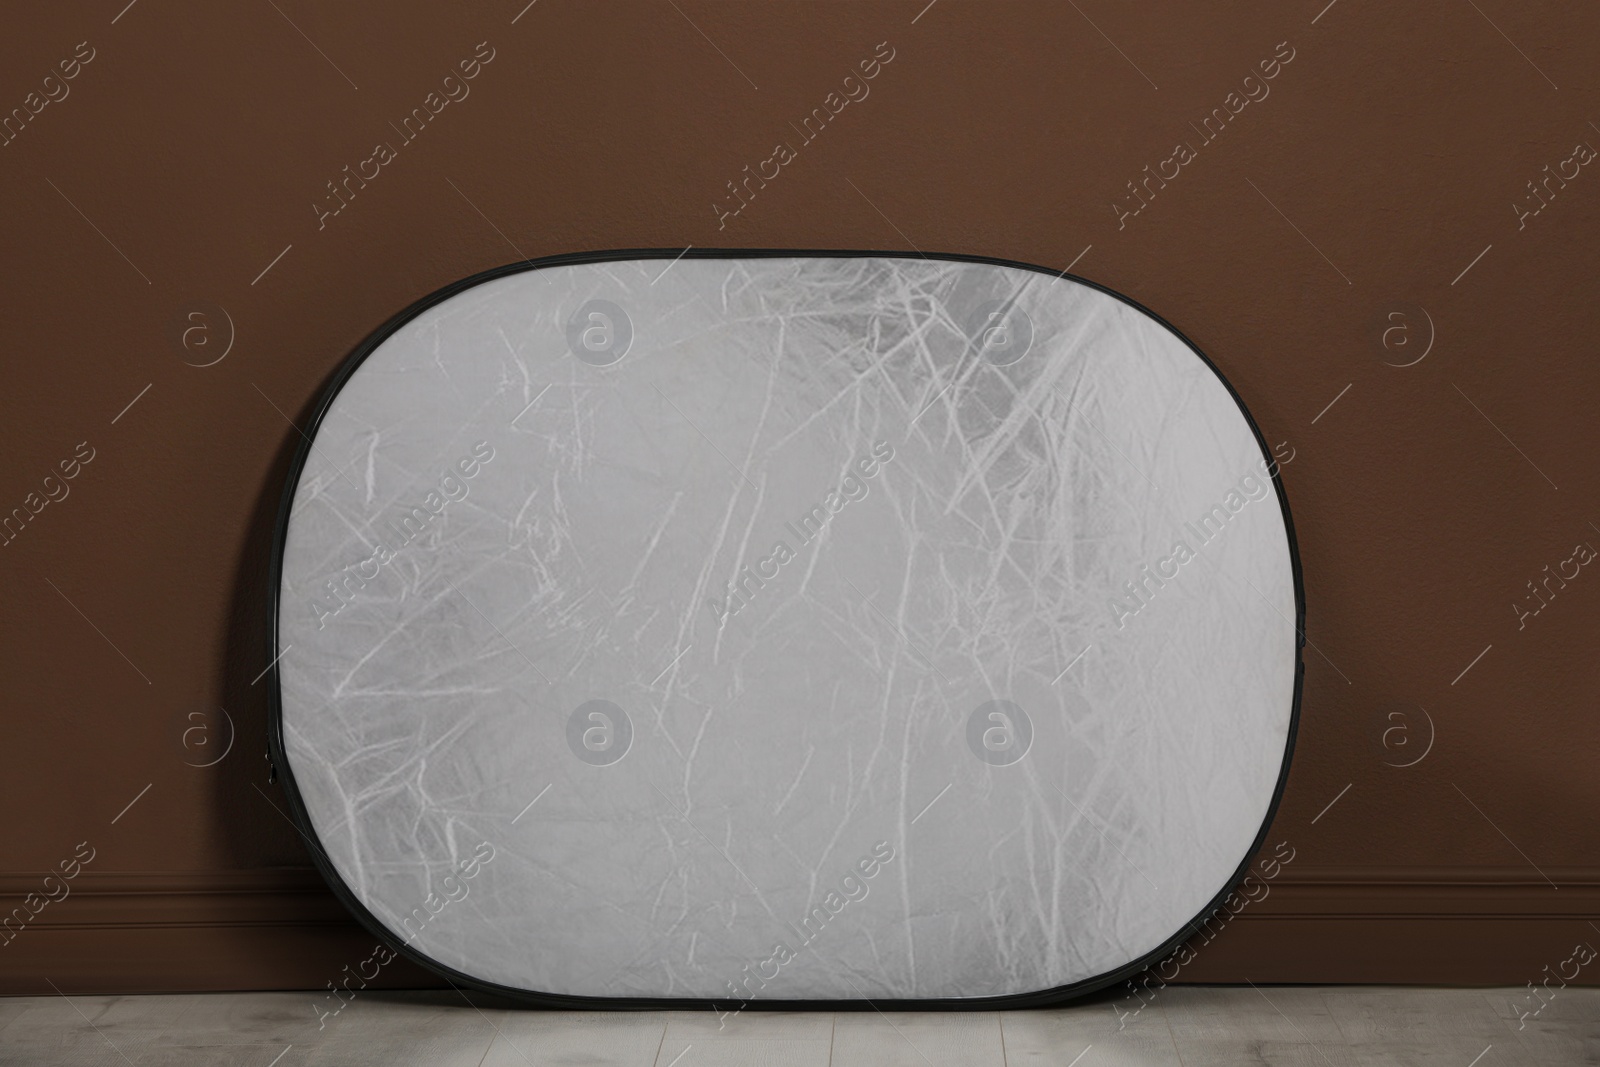 Photo of Studio reflector near brown wall in room. Professional photographer's equipment